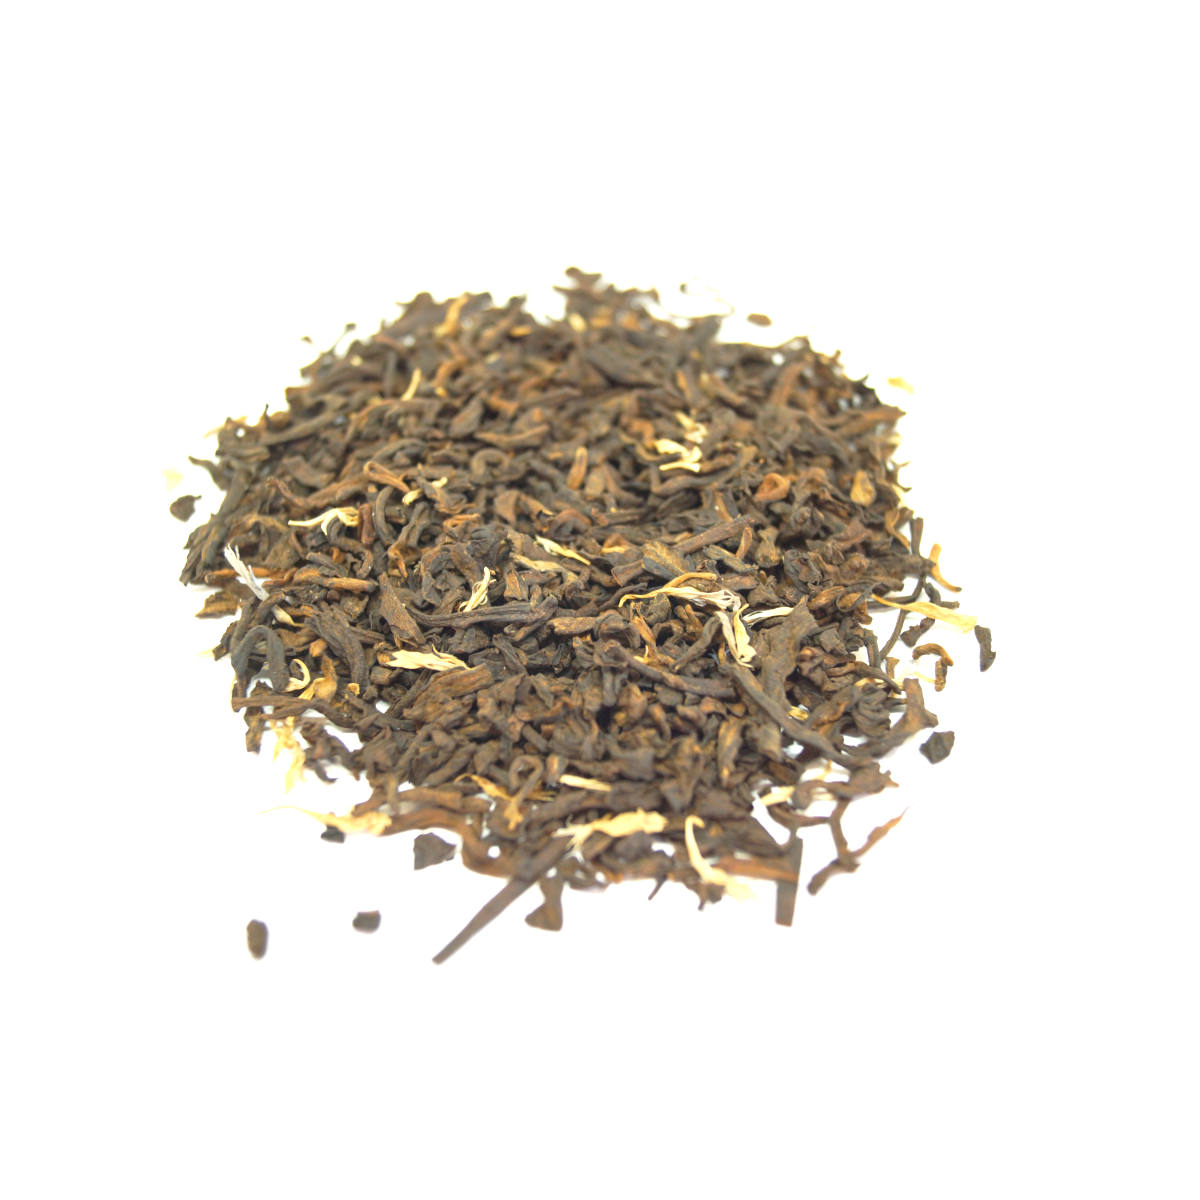 Peach-luscious Pu-erh Dark Tea Cultured and Fermented with Pieces and Peach and Blueberry